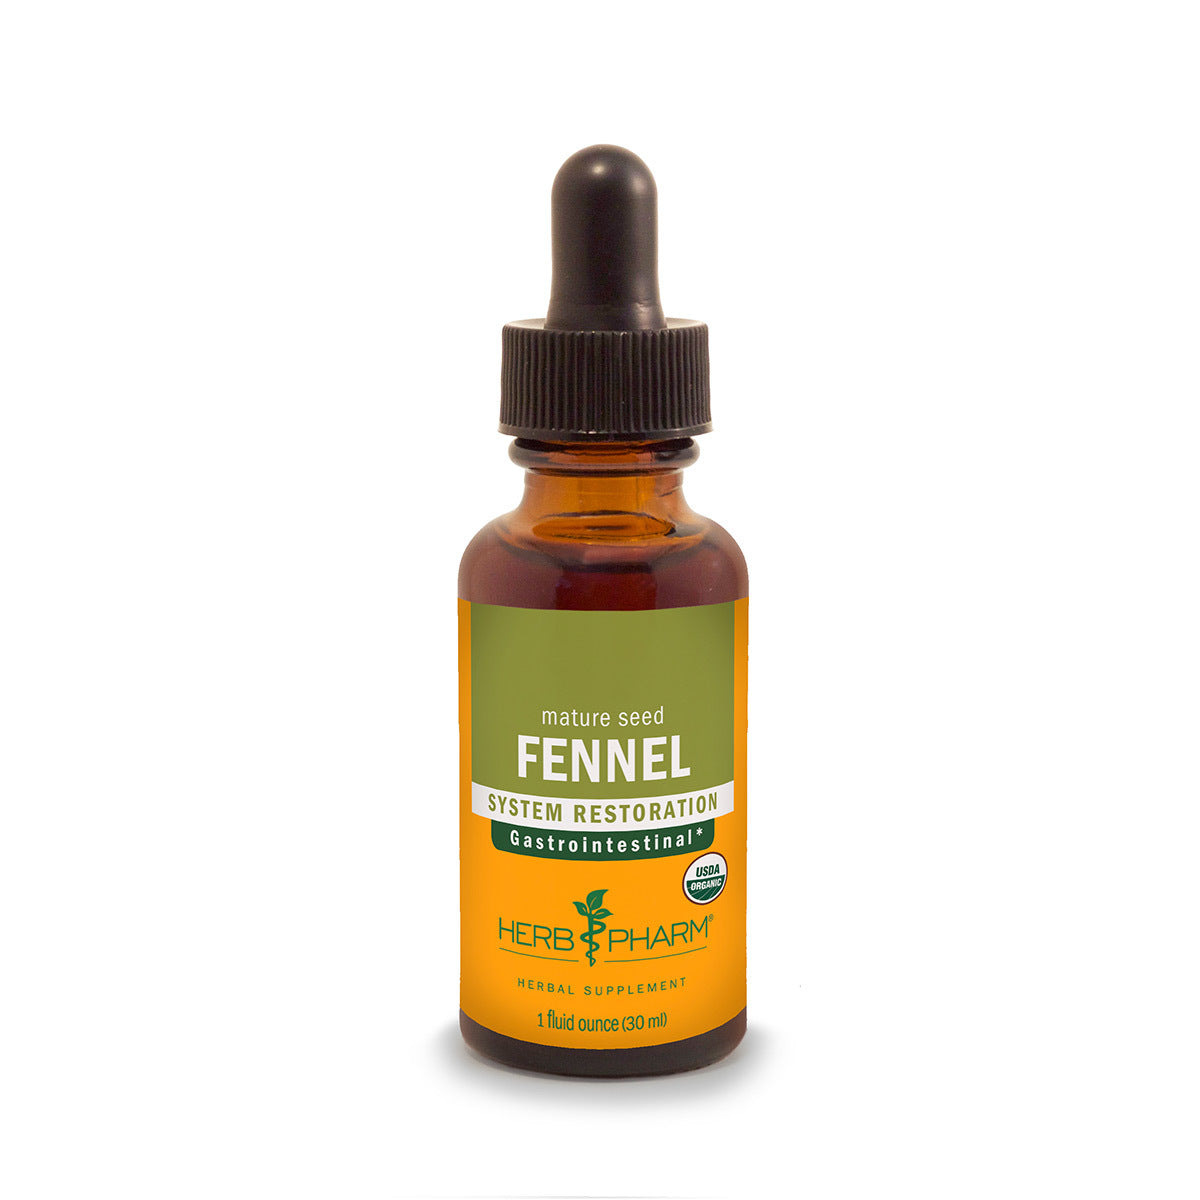 Primary image of Fennel Extract